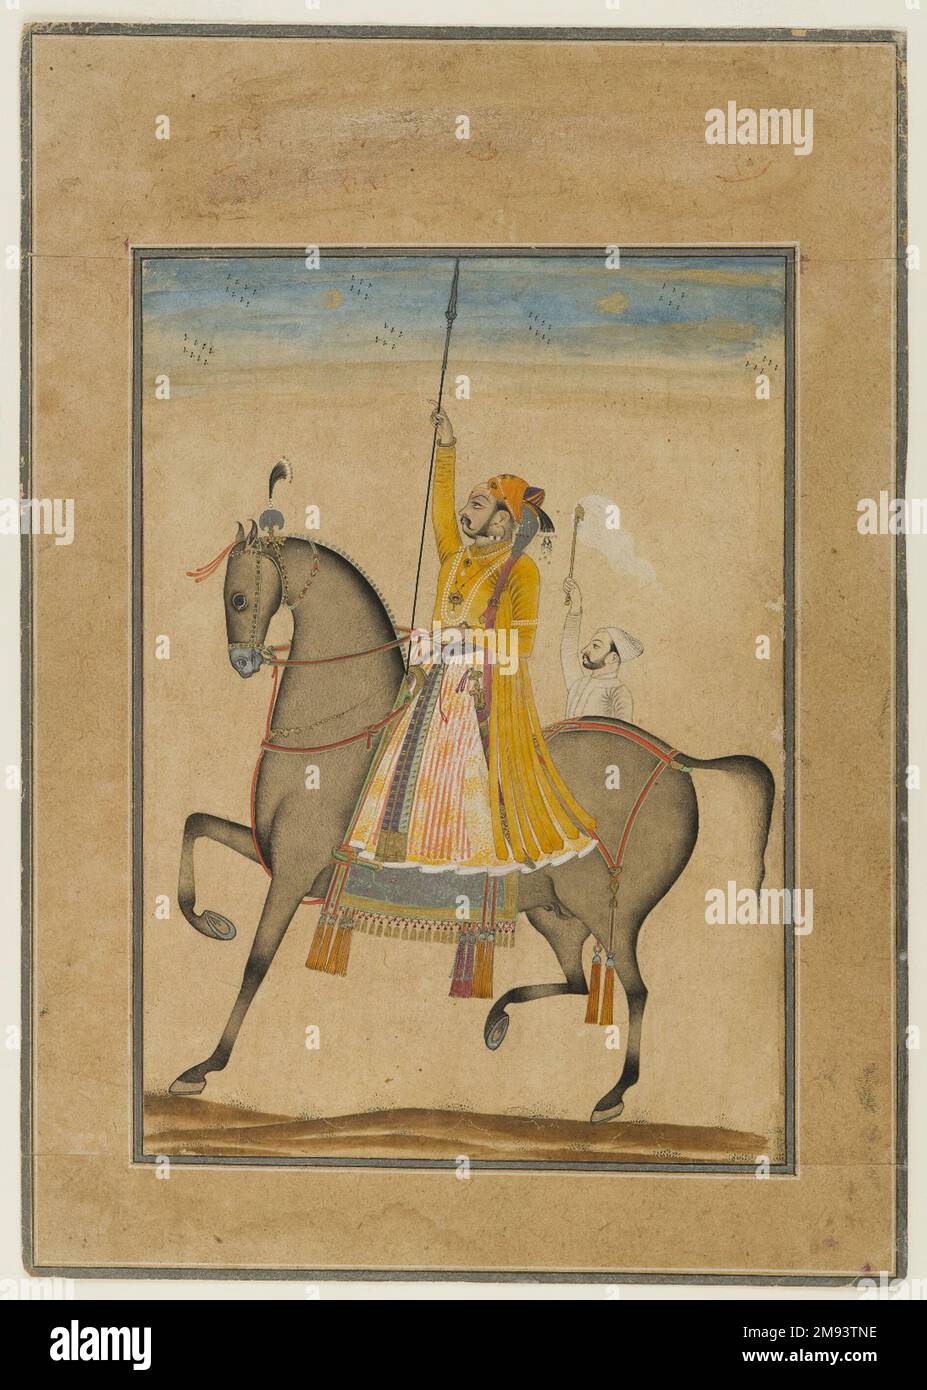 Equestrian Portrait of Maharaja Sujan Singh of Bikaner Kasam, Son of Muhammad. Equestrian Portrait of Maharaja Sujan Singh of Bikaner, ca. 1747. Opaque watercolor, silver, and gold on paper, sheet: 11 1/2 x 8 1/8 in. (29.2 x 20.6 cm).   Asian Art ca. 1747 Stock Photo